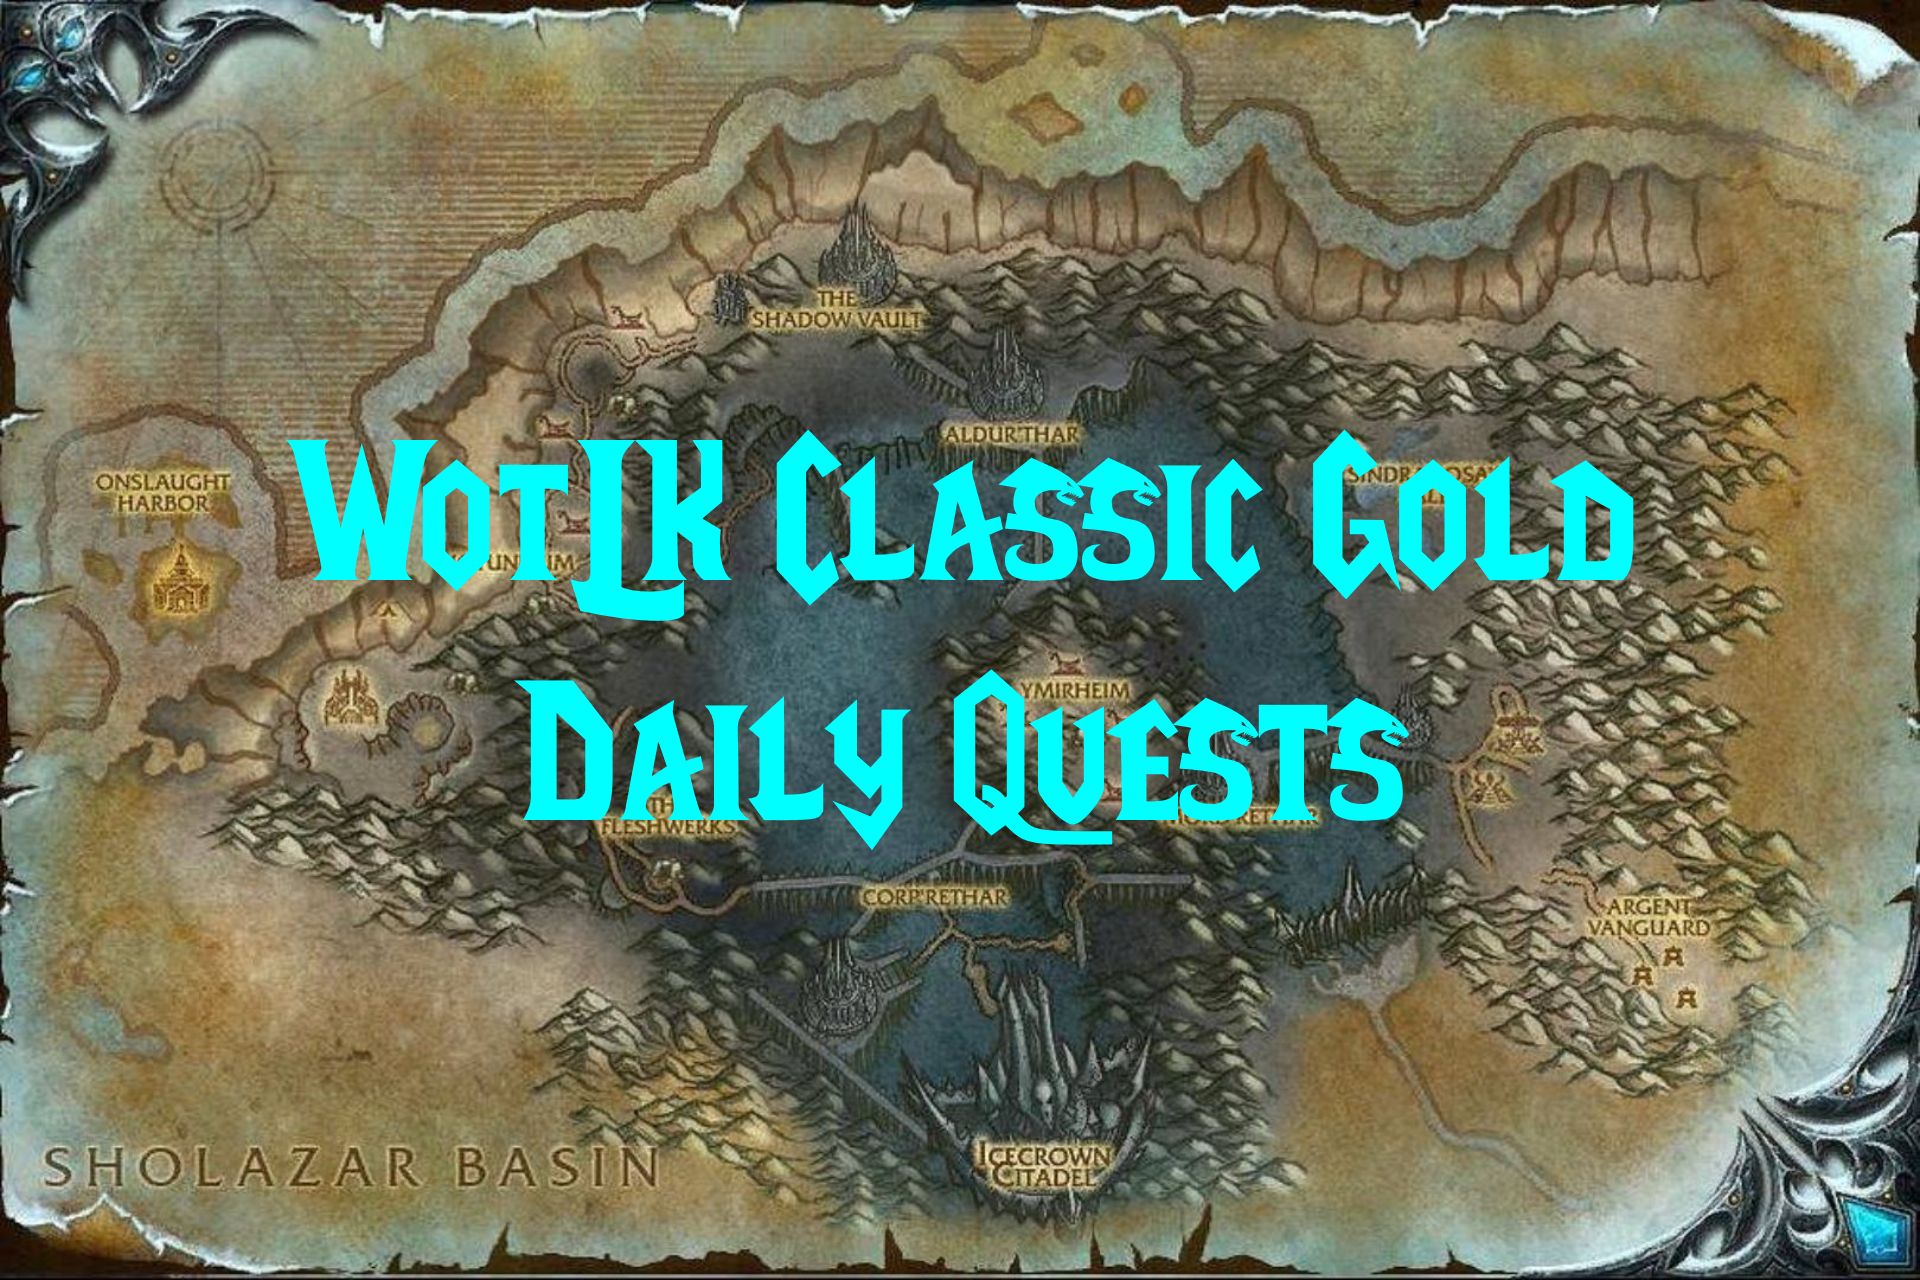 Unlock flying in WoW WotLK Classic - CoinLooting